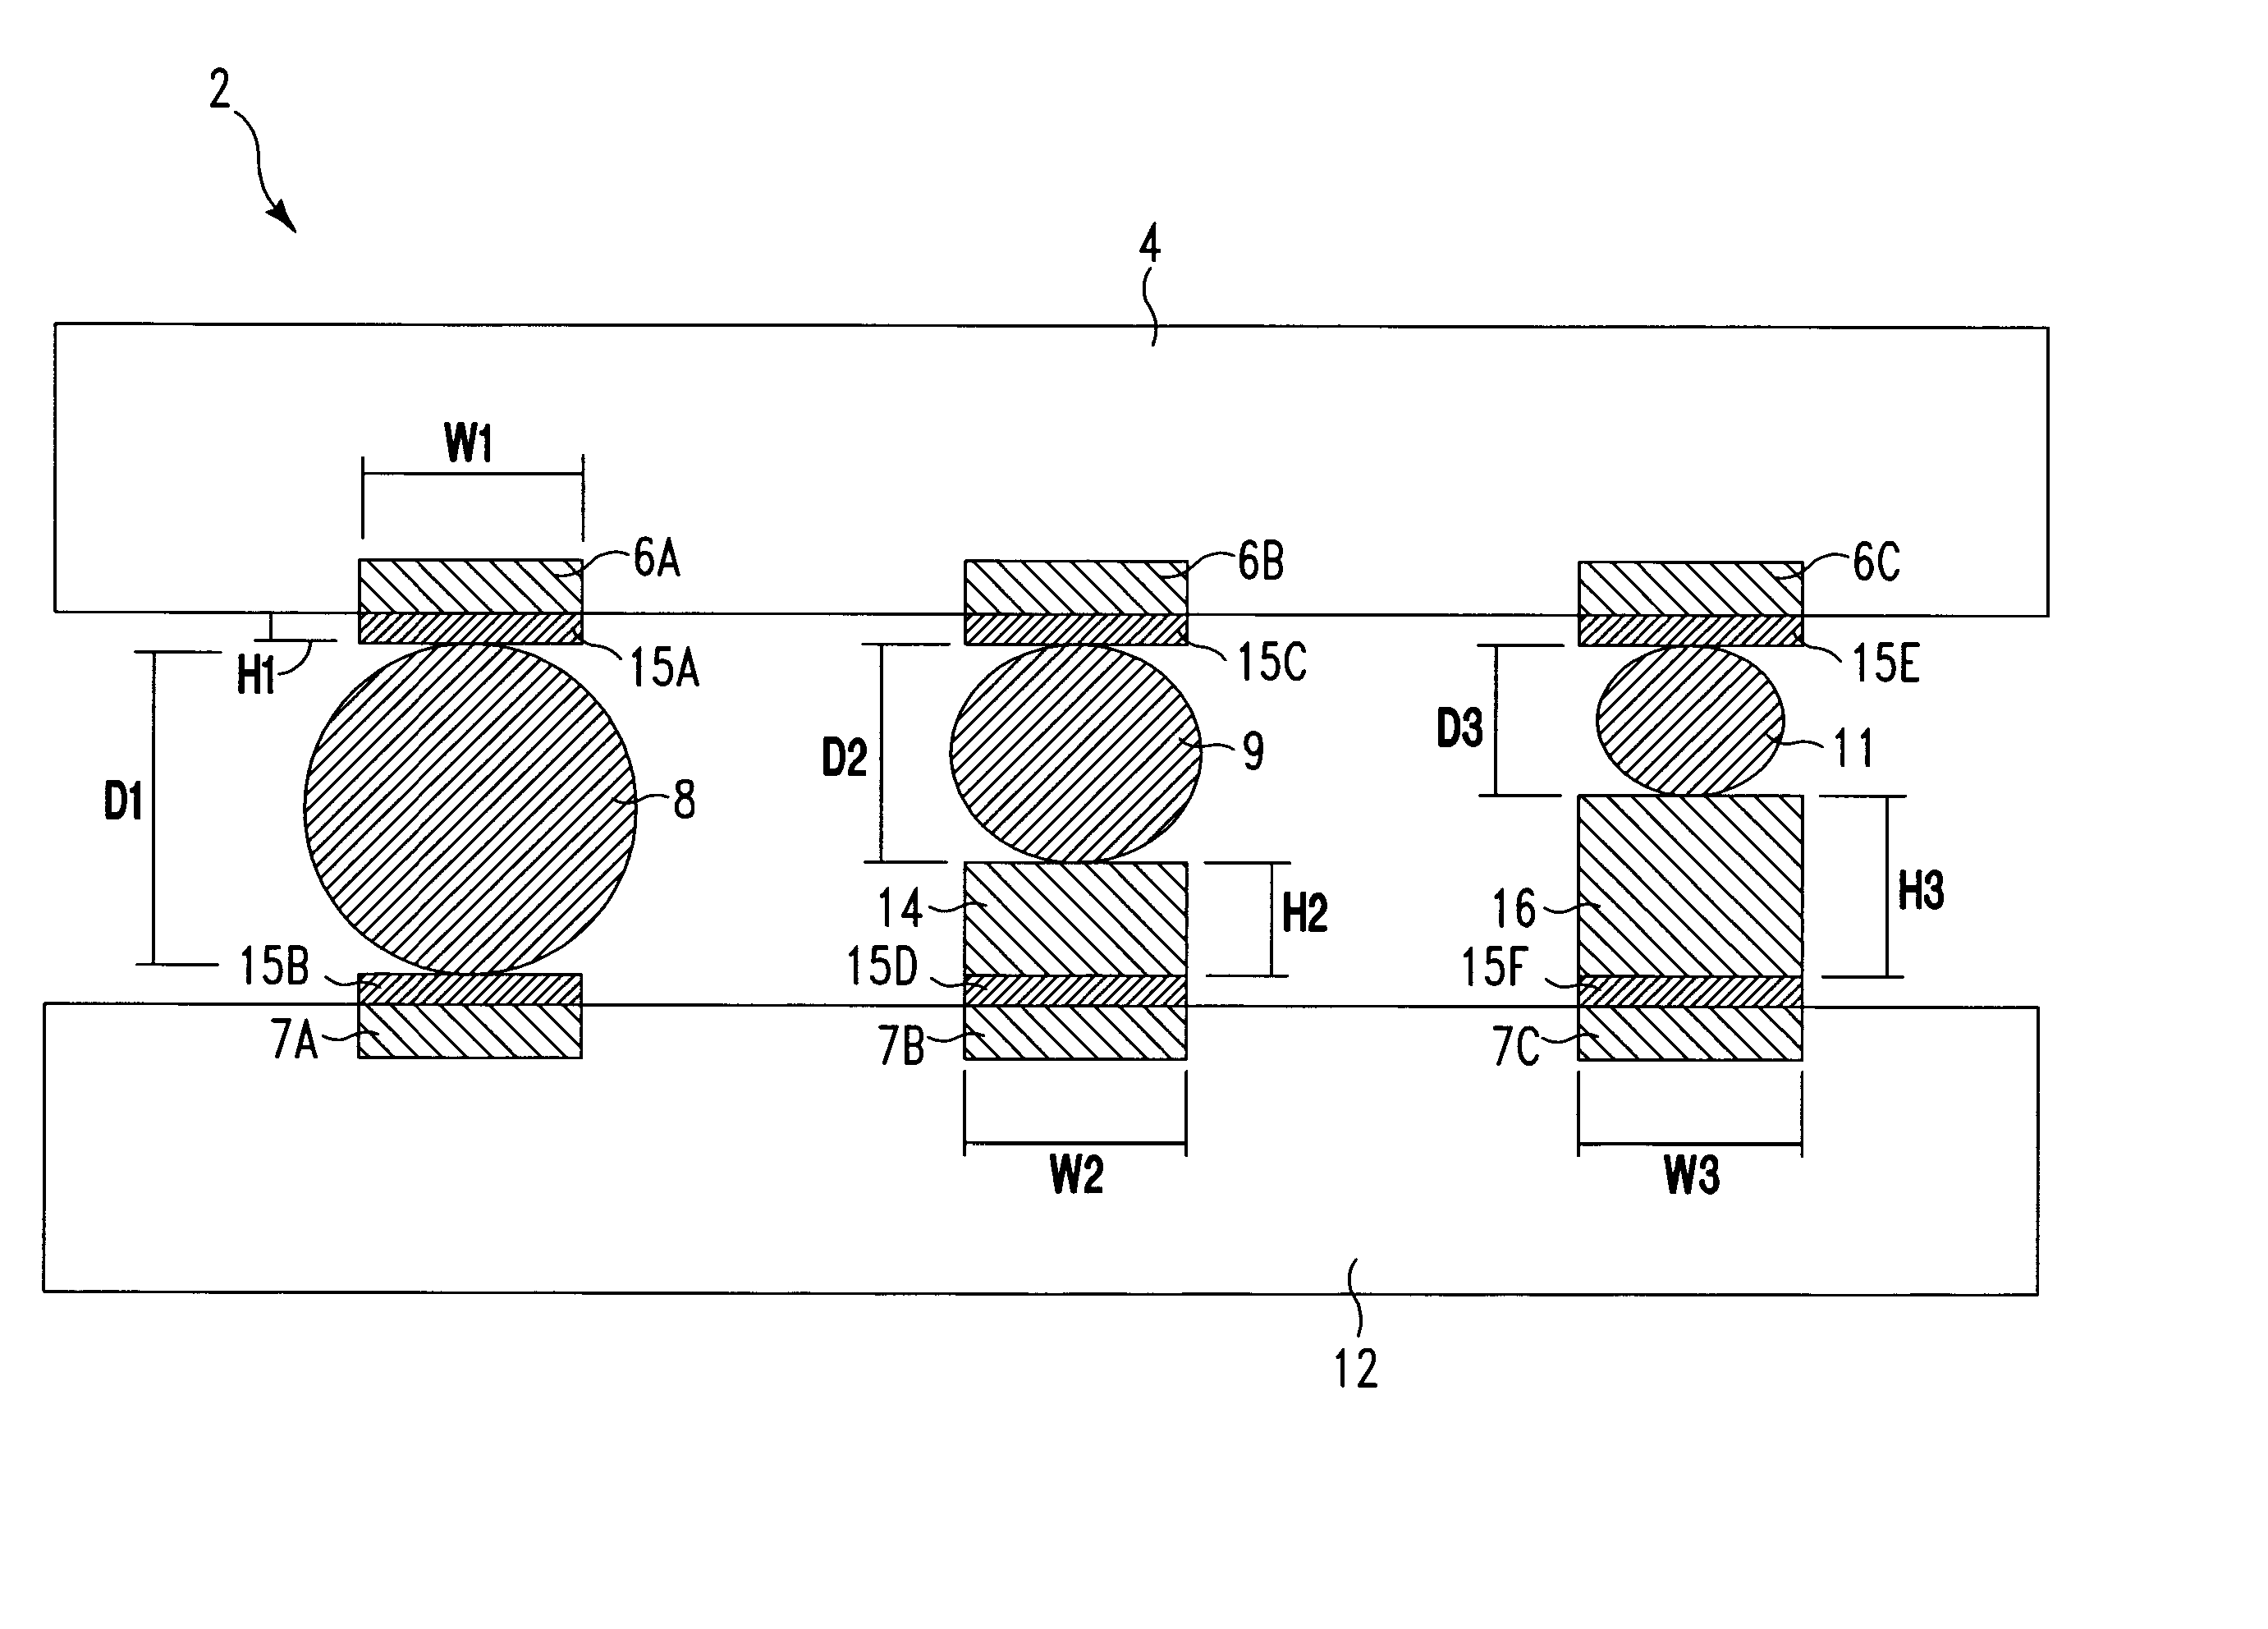 Structure and method for producing multiple size interconnections